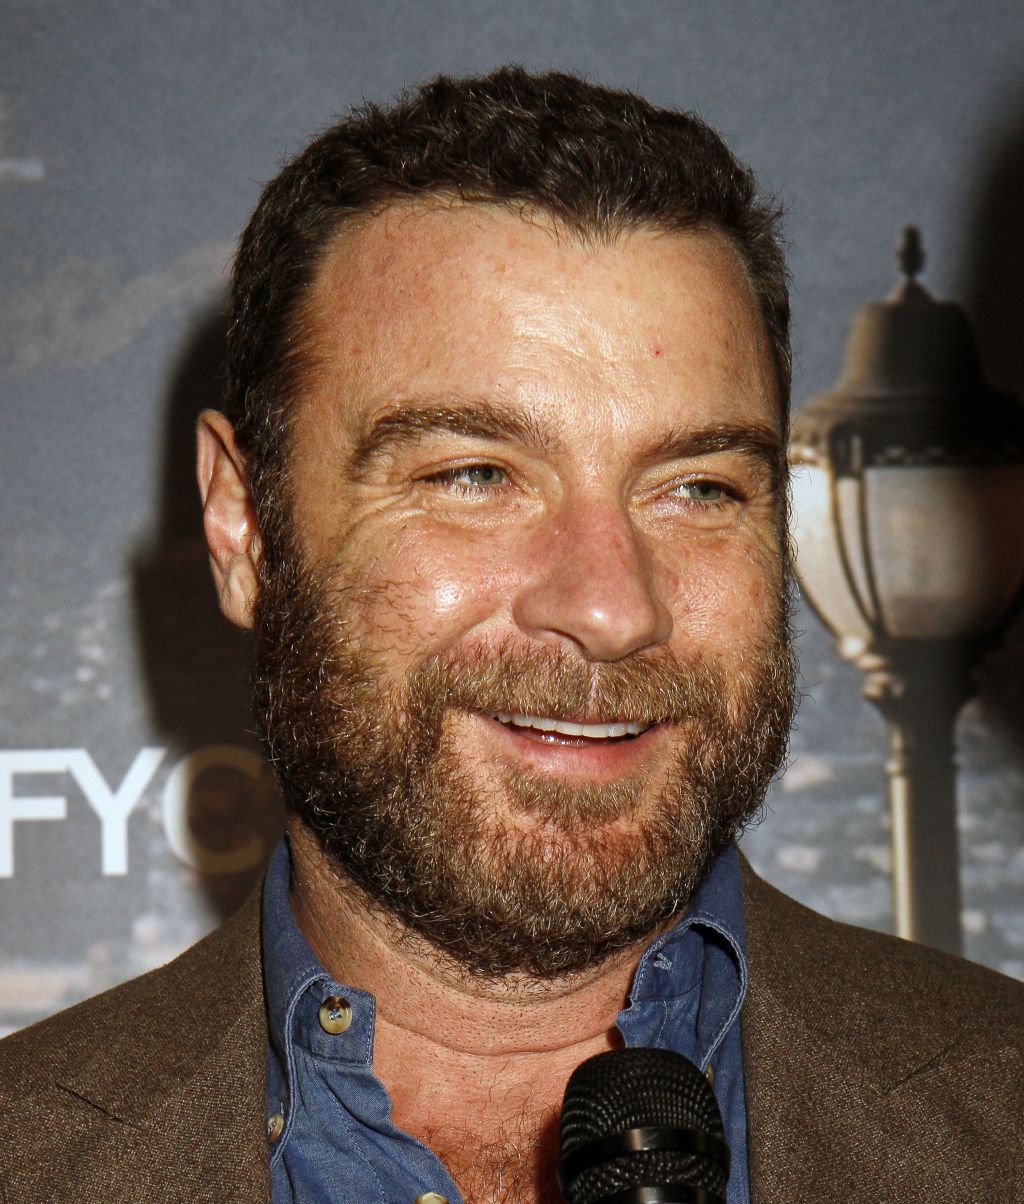 &apos;Ray Donovan&apos; For Your Consideration event